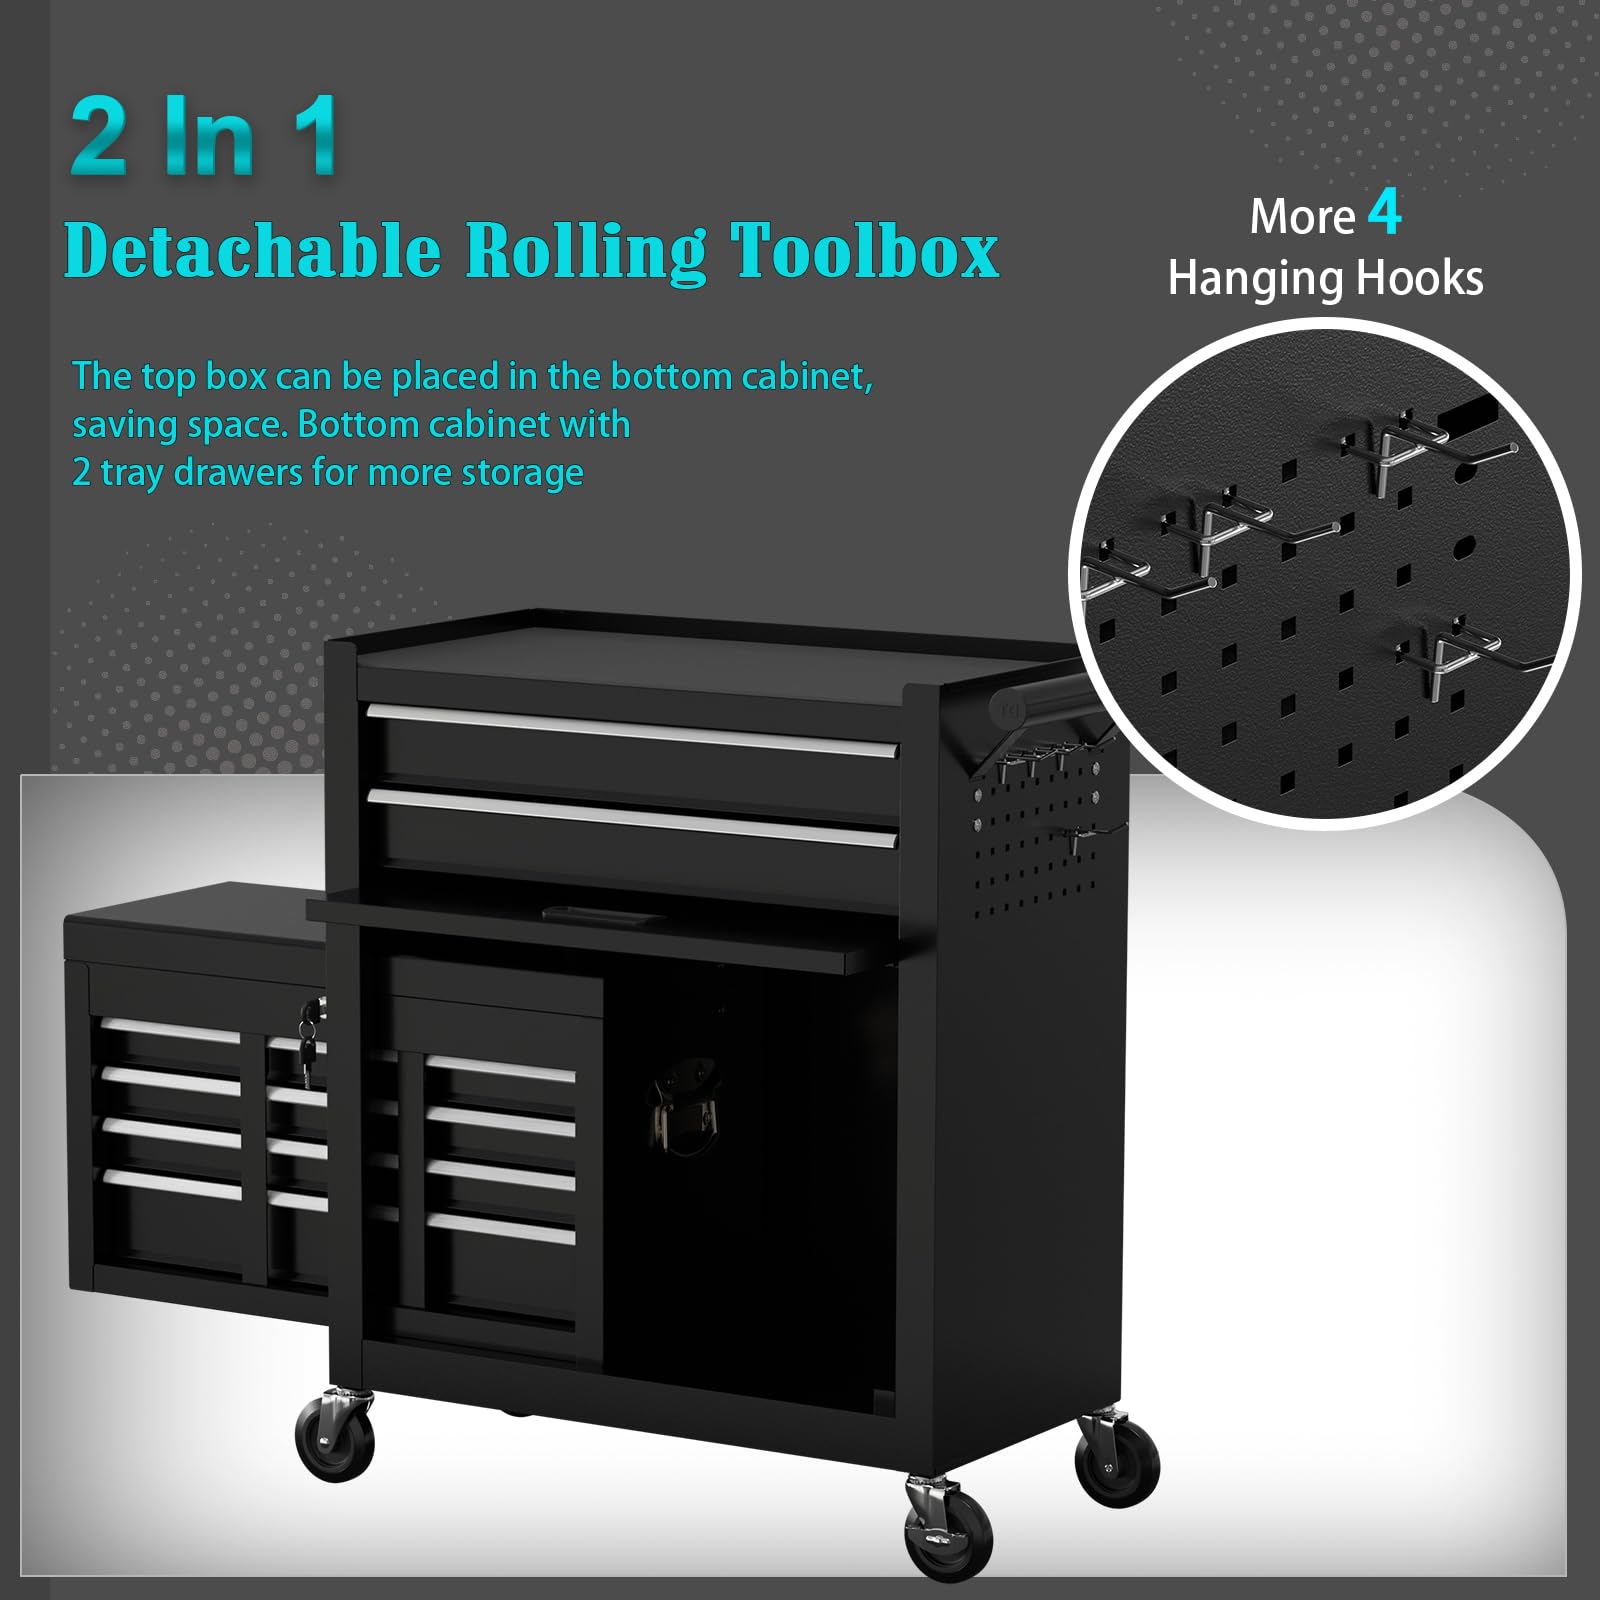 Yenntrss 8-Drawer Rolling Tool Chest & Removable with Wheels,Large Tool Storage Cabinet with Drawers for Garage,Toolbox Organizer with Lock for Mechanics,Warehouse,Worlshop (Black)